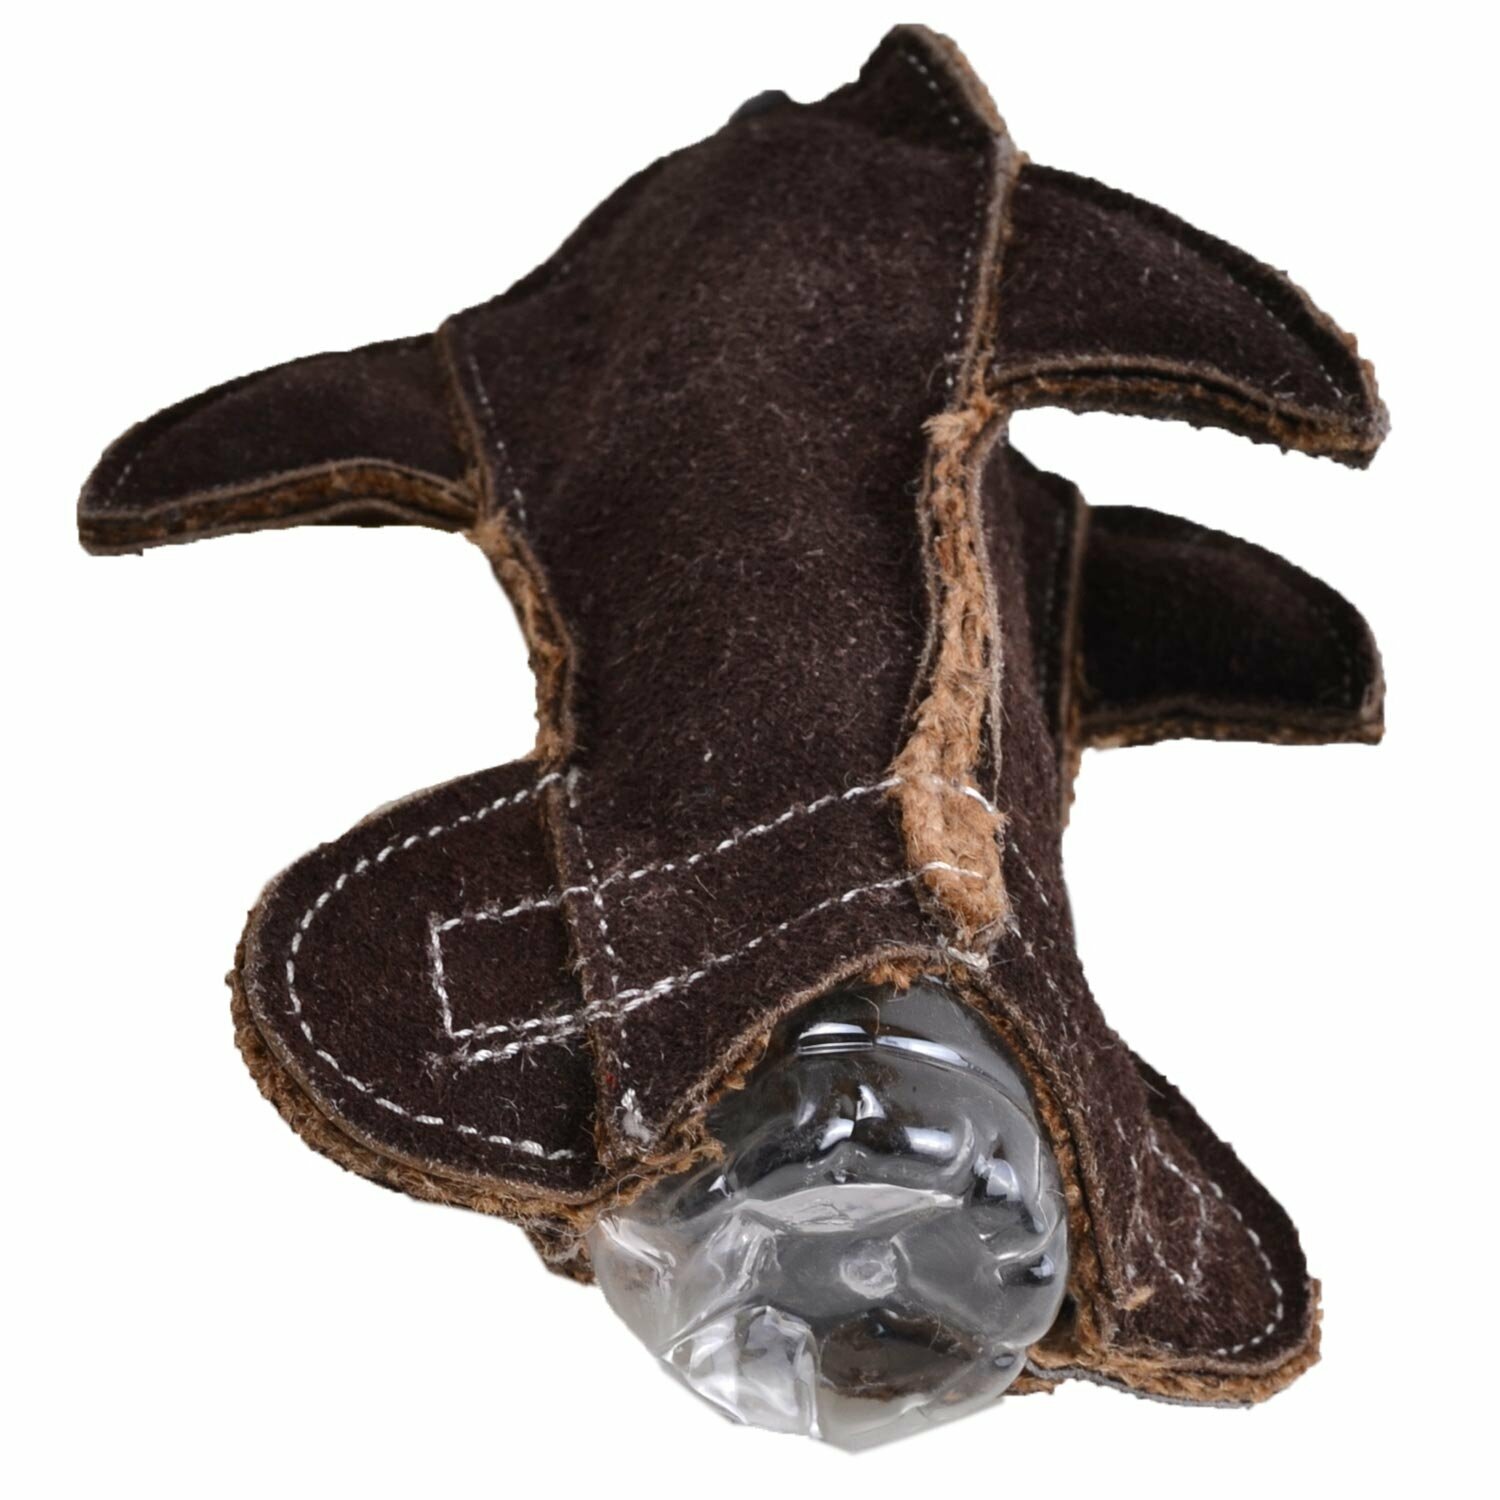 Leather dog toys and recycled pet bottles